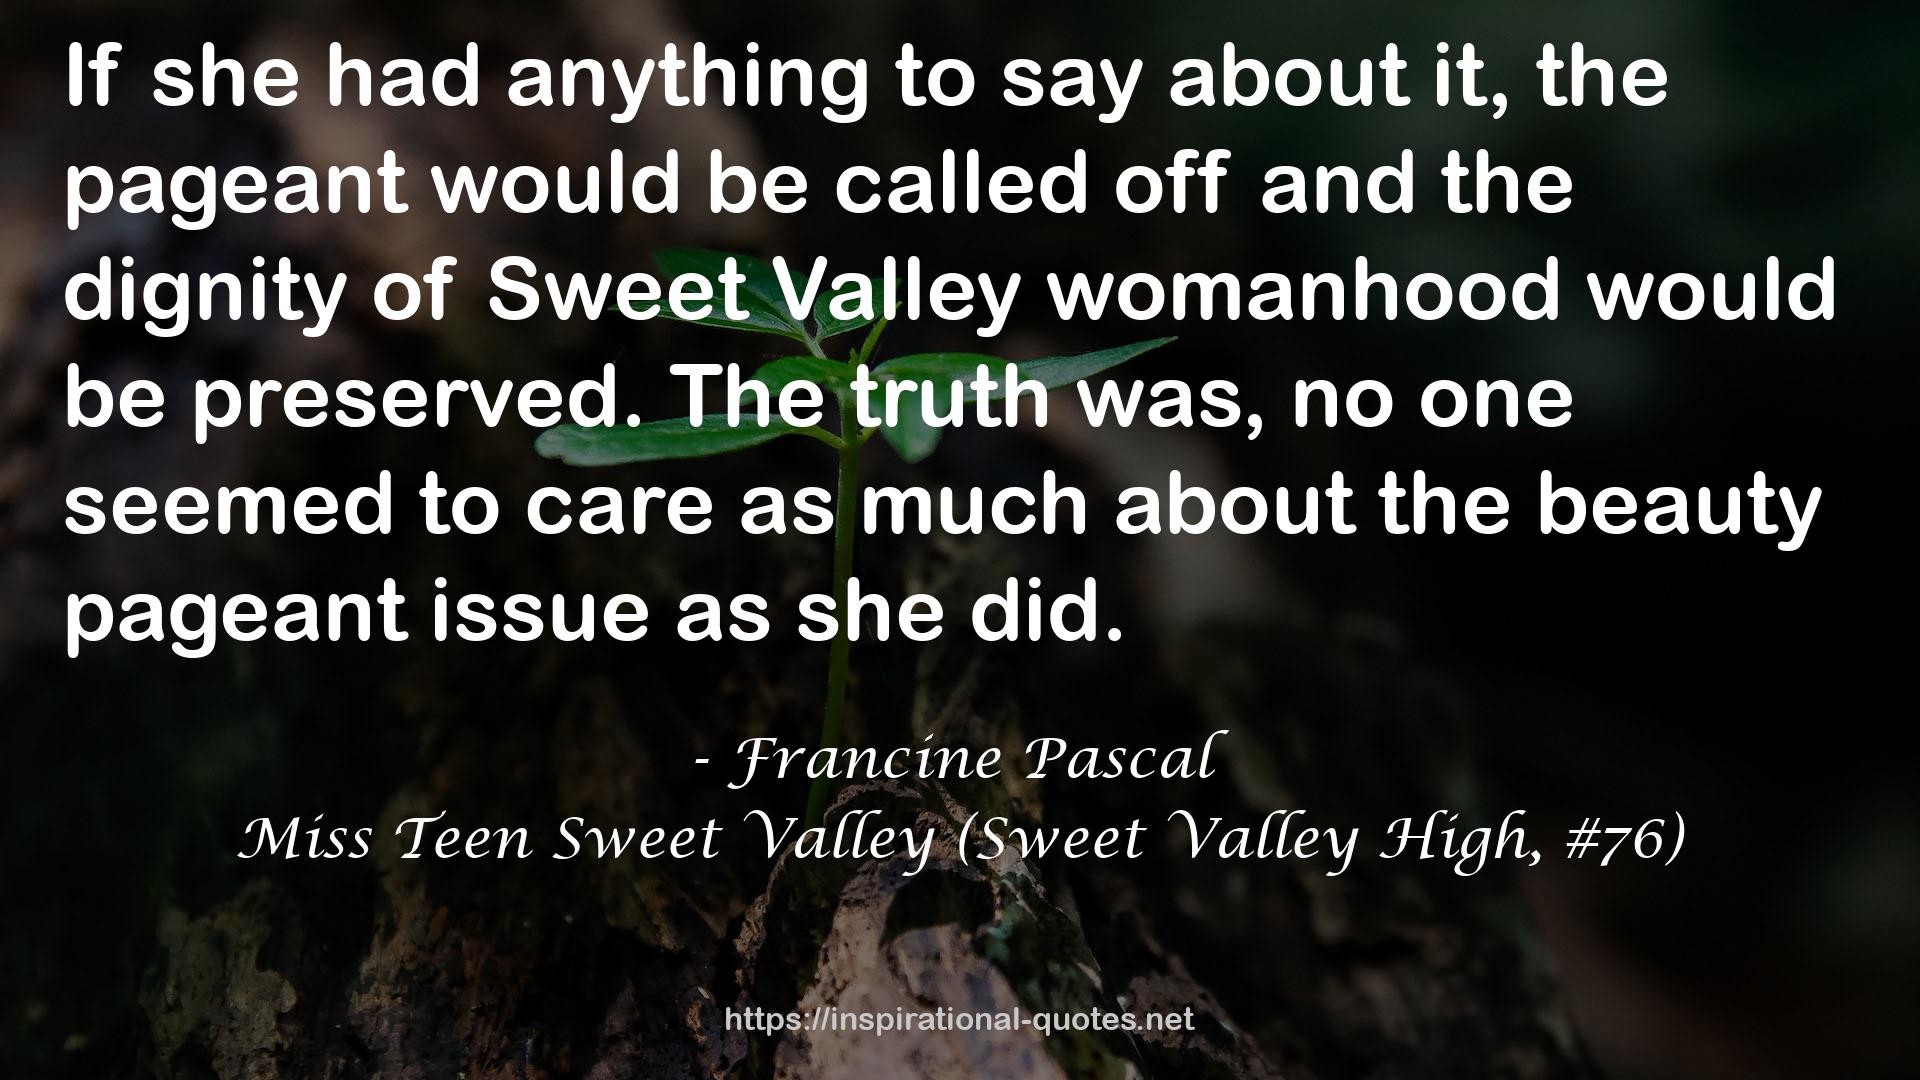 Miss Teen Sweet Valley (Sweet Valley High, #76) QUOTES